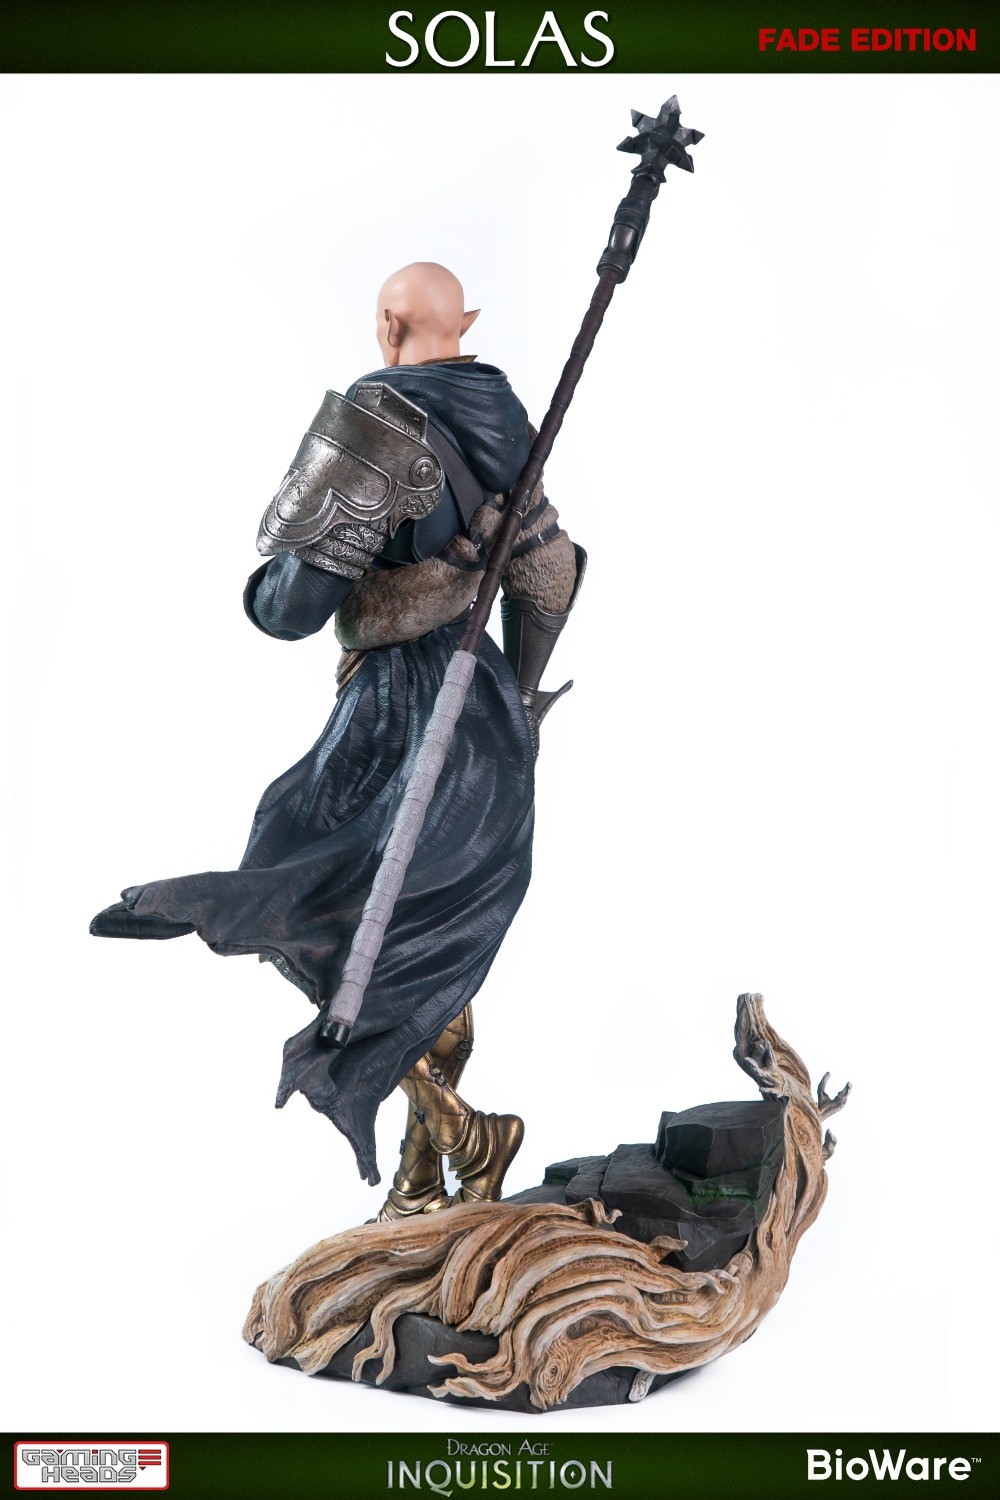 Dragon Age: Inquisition - Solas statue | Gaming Heads